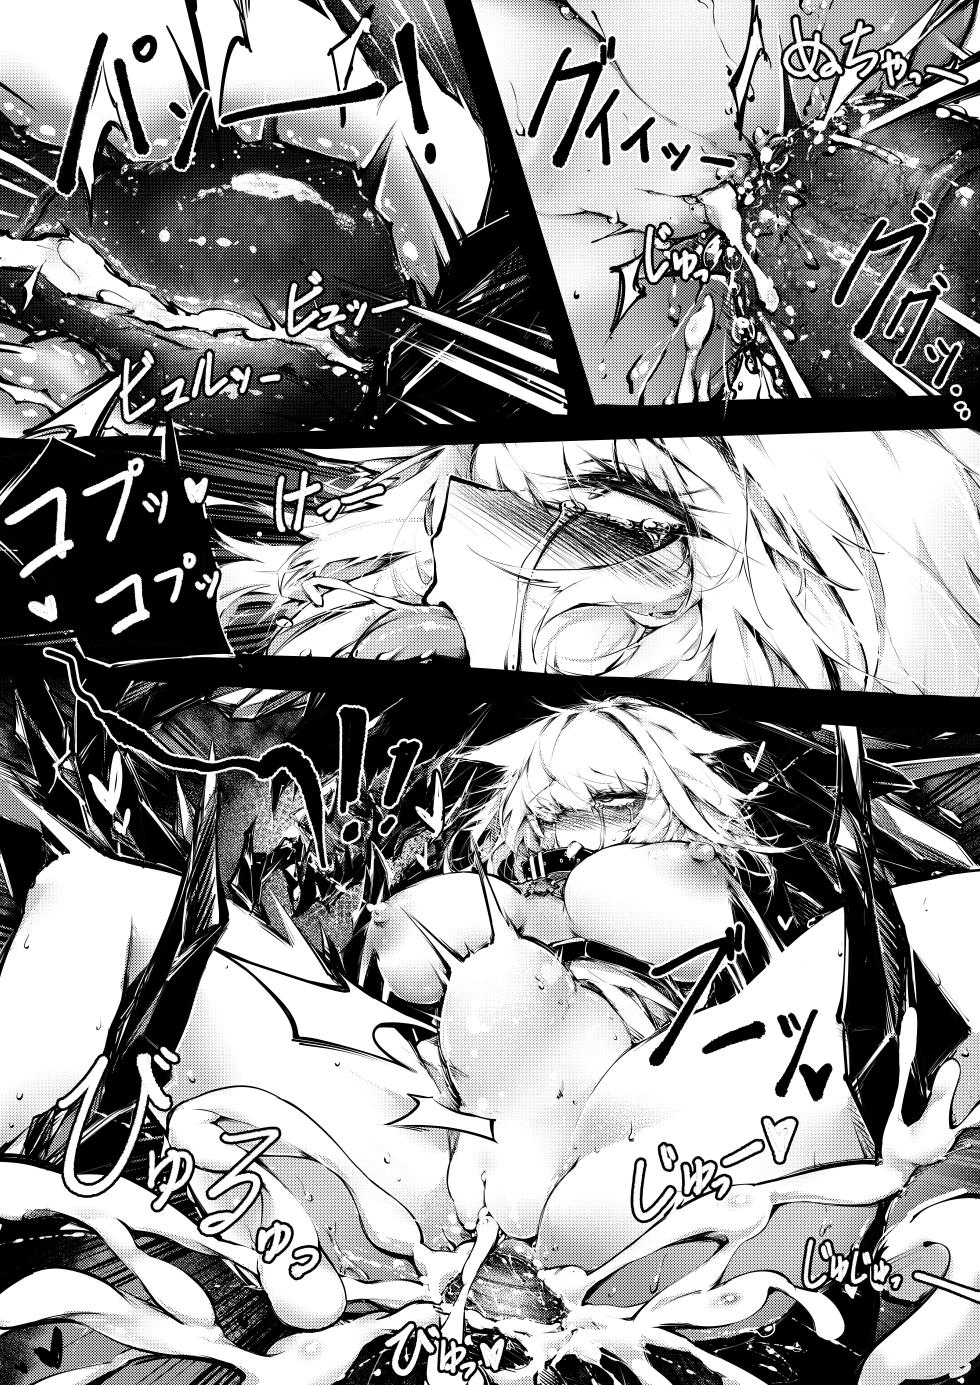 [RKZROK] Doujin_Kal'tsit (01-28p) (Arknights) [Chinese] [Ongoing] - Page 27